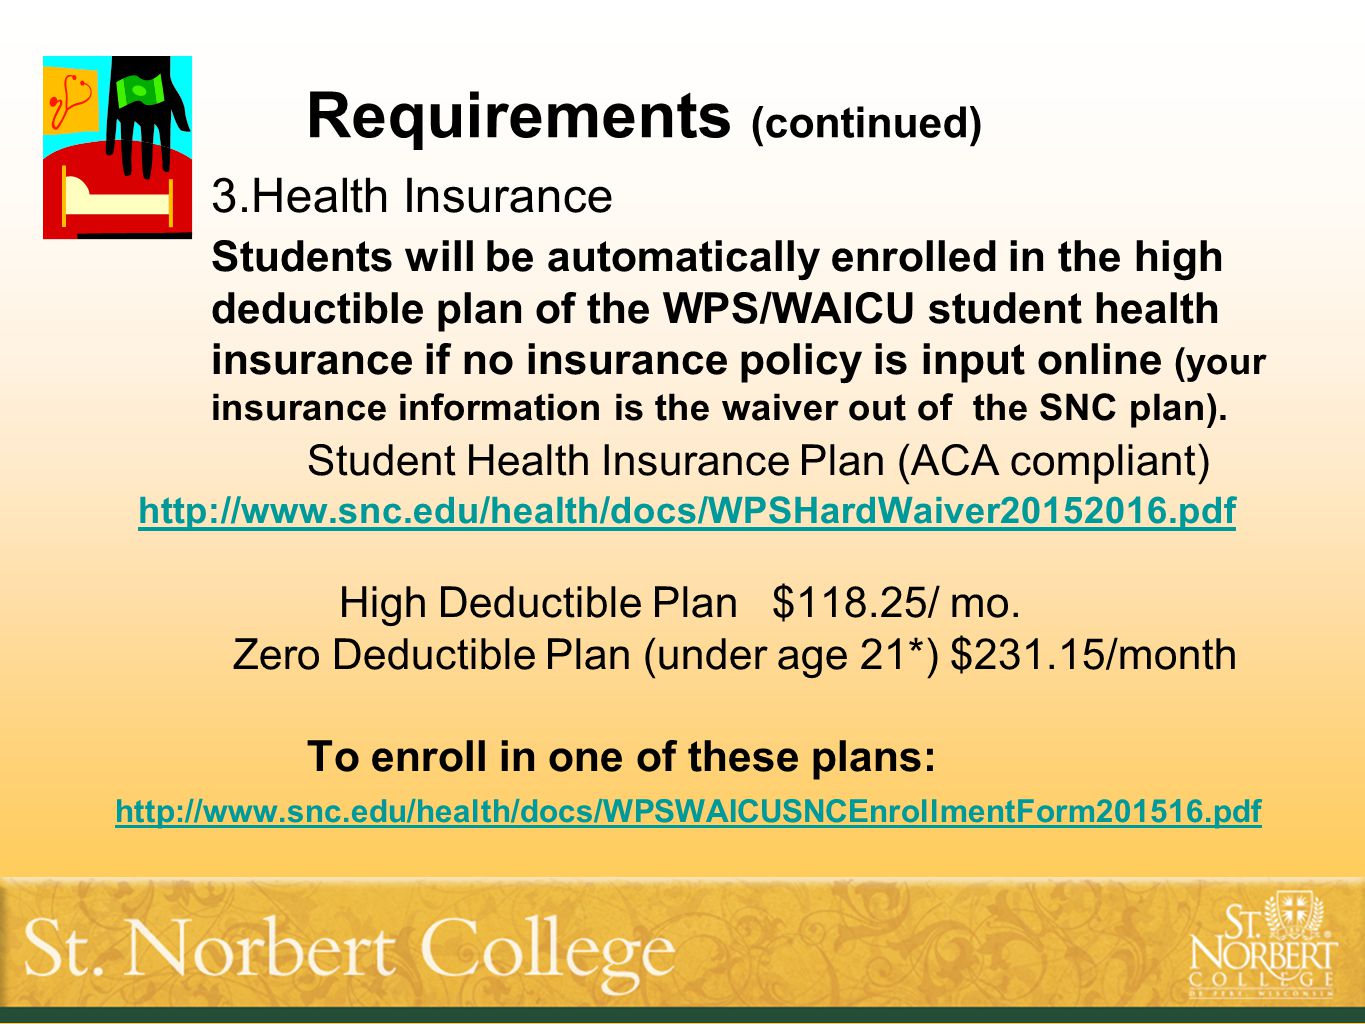 Requirements (continued) 3.Health Insurance Students will be automatically enrolled in the high deductible plan of the WPS/WAICU student health insurance if no insurance policy is input online (your insurance information is the waiver out of the SNC plan).